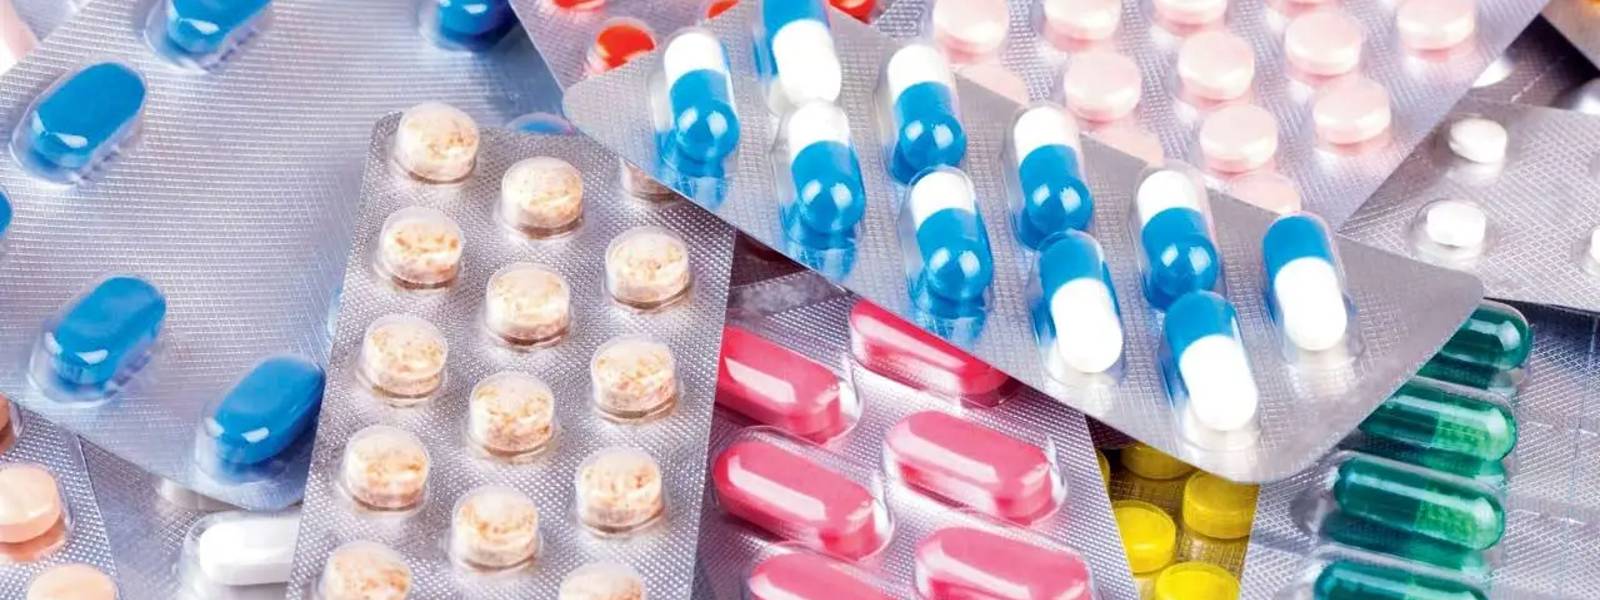 Health Minister raises concerns over shortage of drugs in central storage